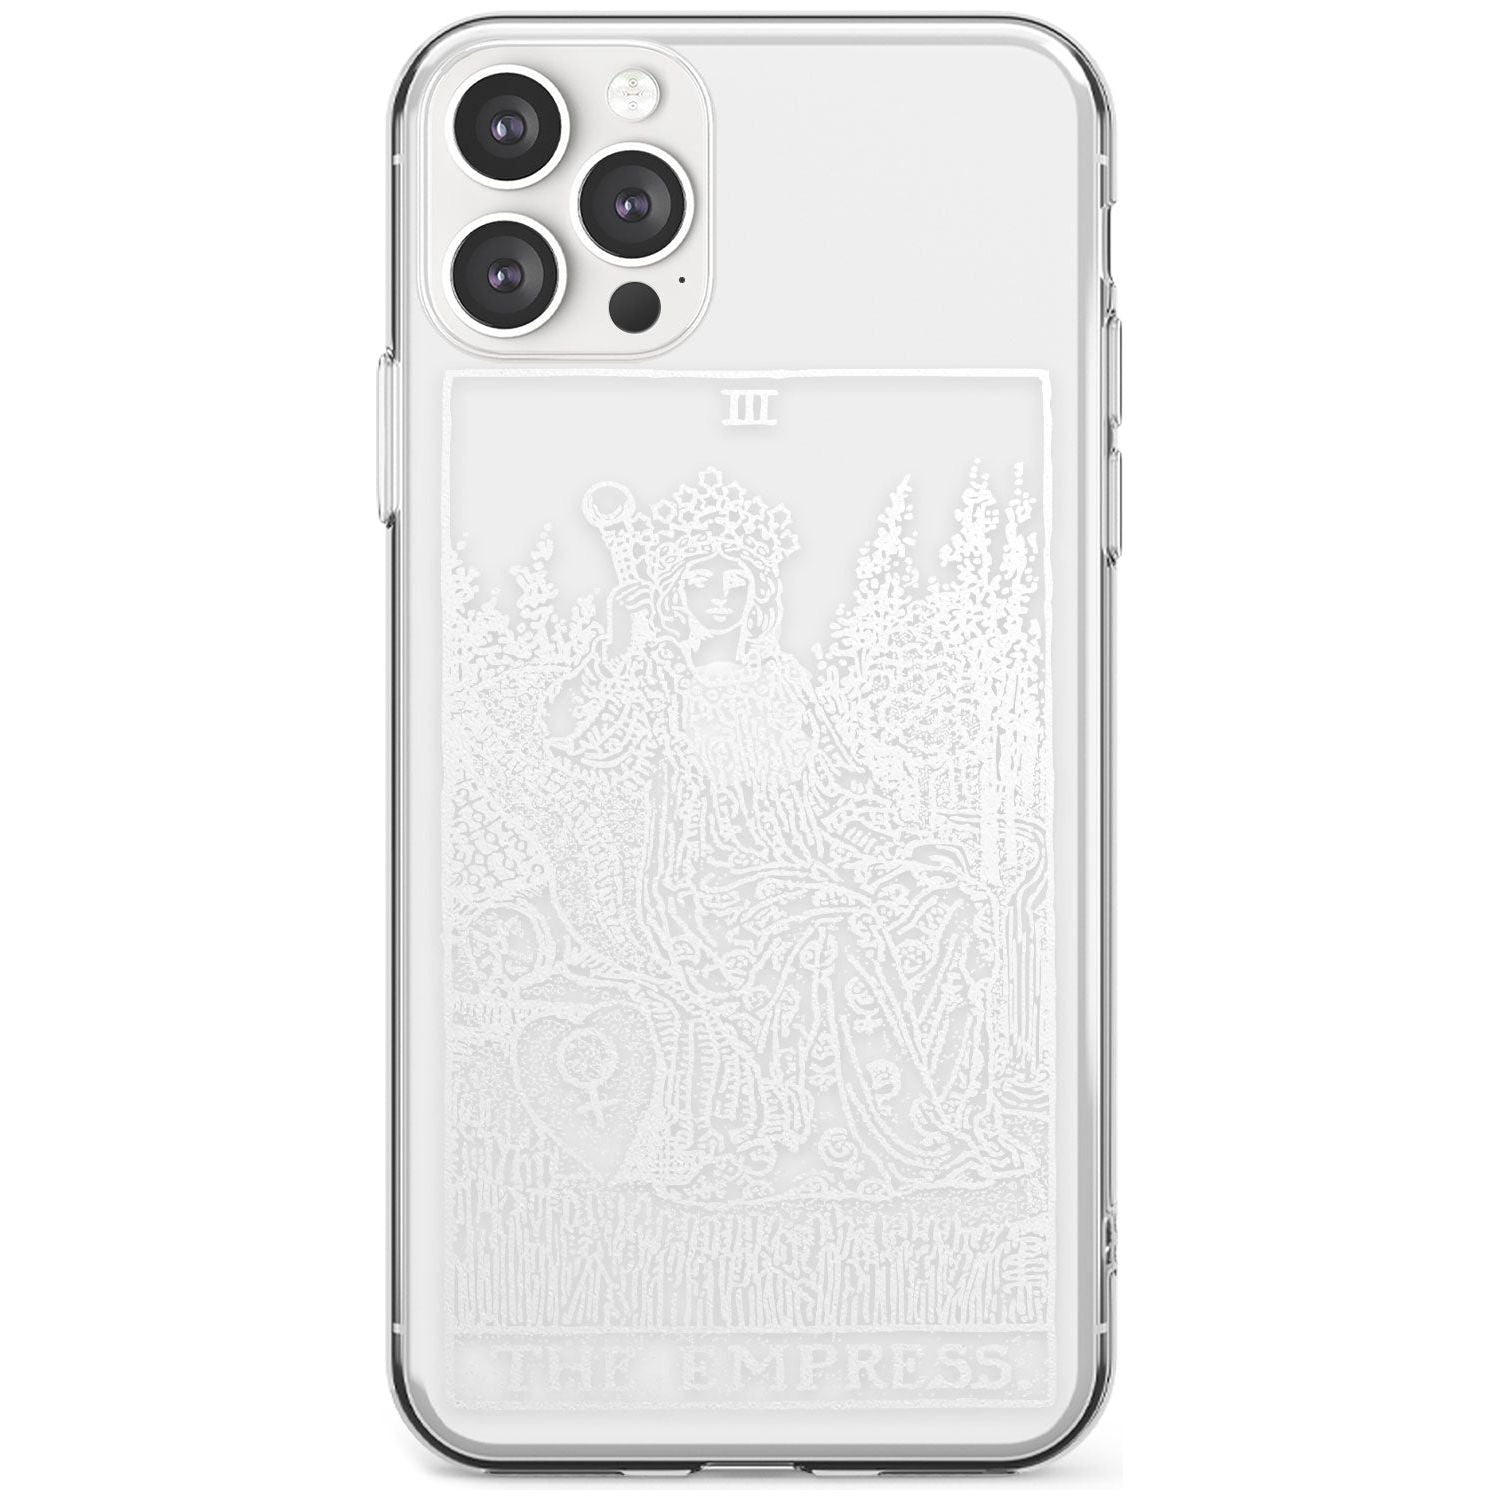 The Empress Tarot Card - White Transparent Black Impact Phone Case for iPhone 11 Pro Max